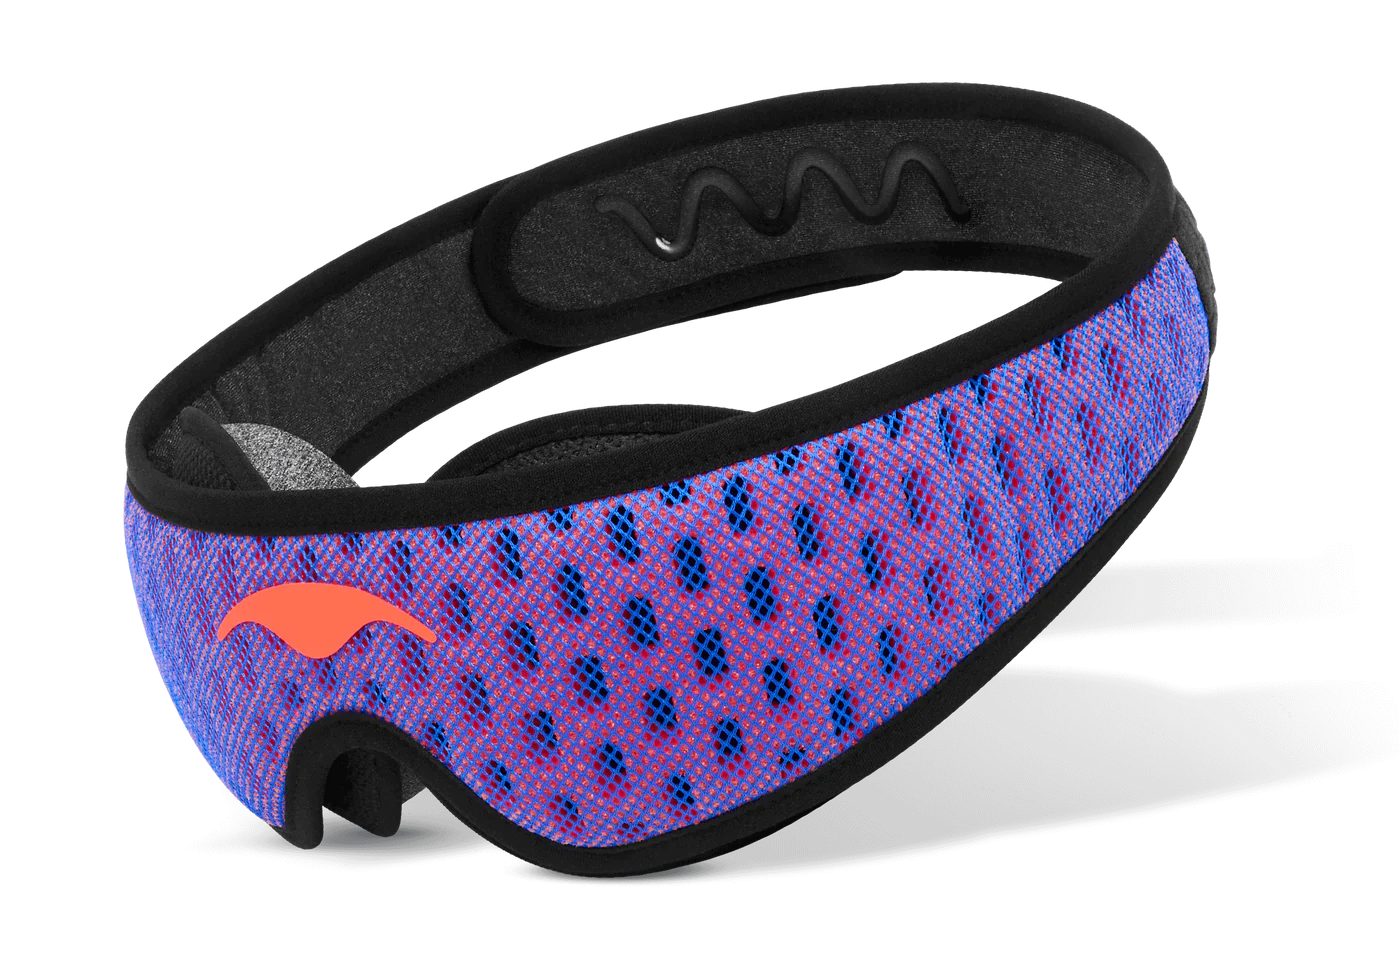 A blue mesh sleep mask with C-shaped eye cups and anti-slip grippy gel on the head strap’s interior.